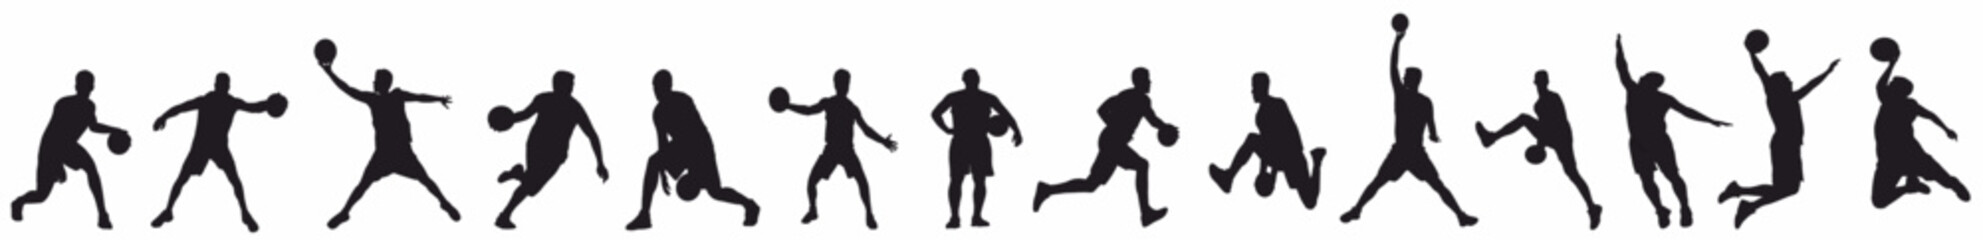  silhouettes of basketball players